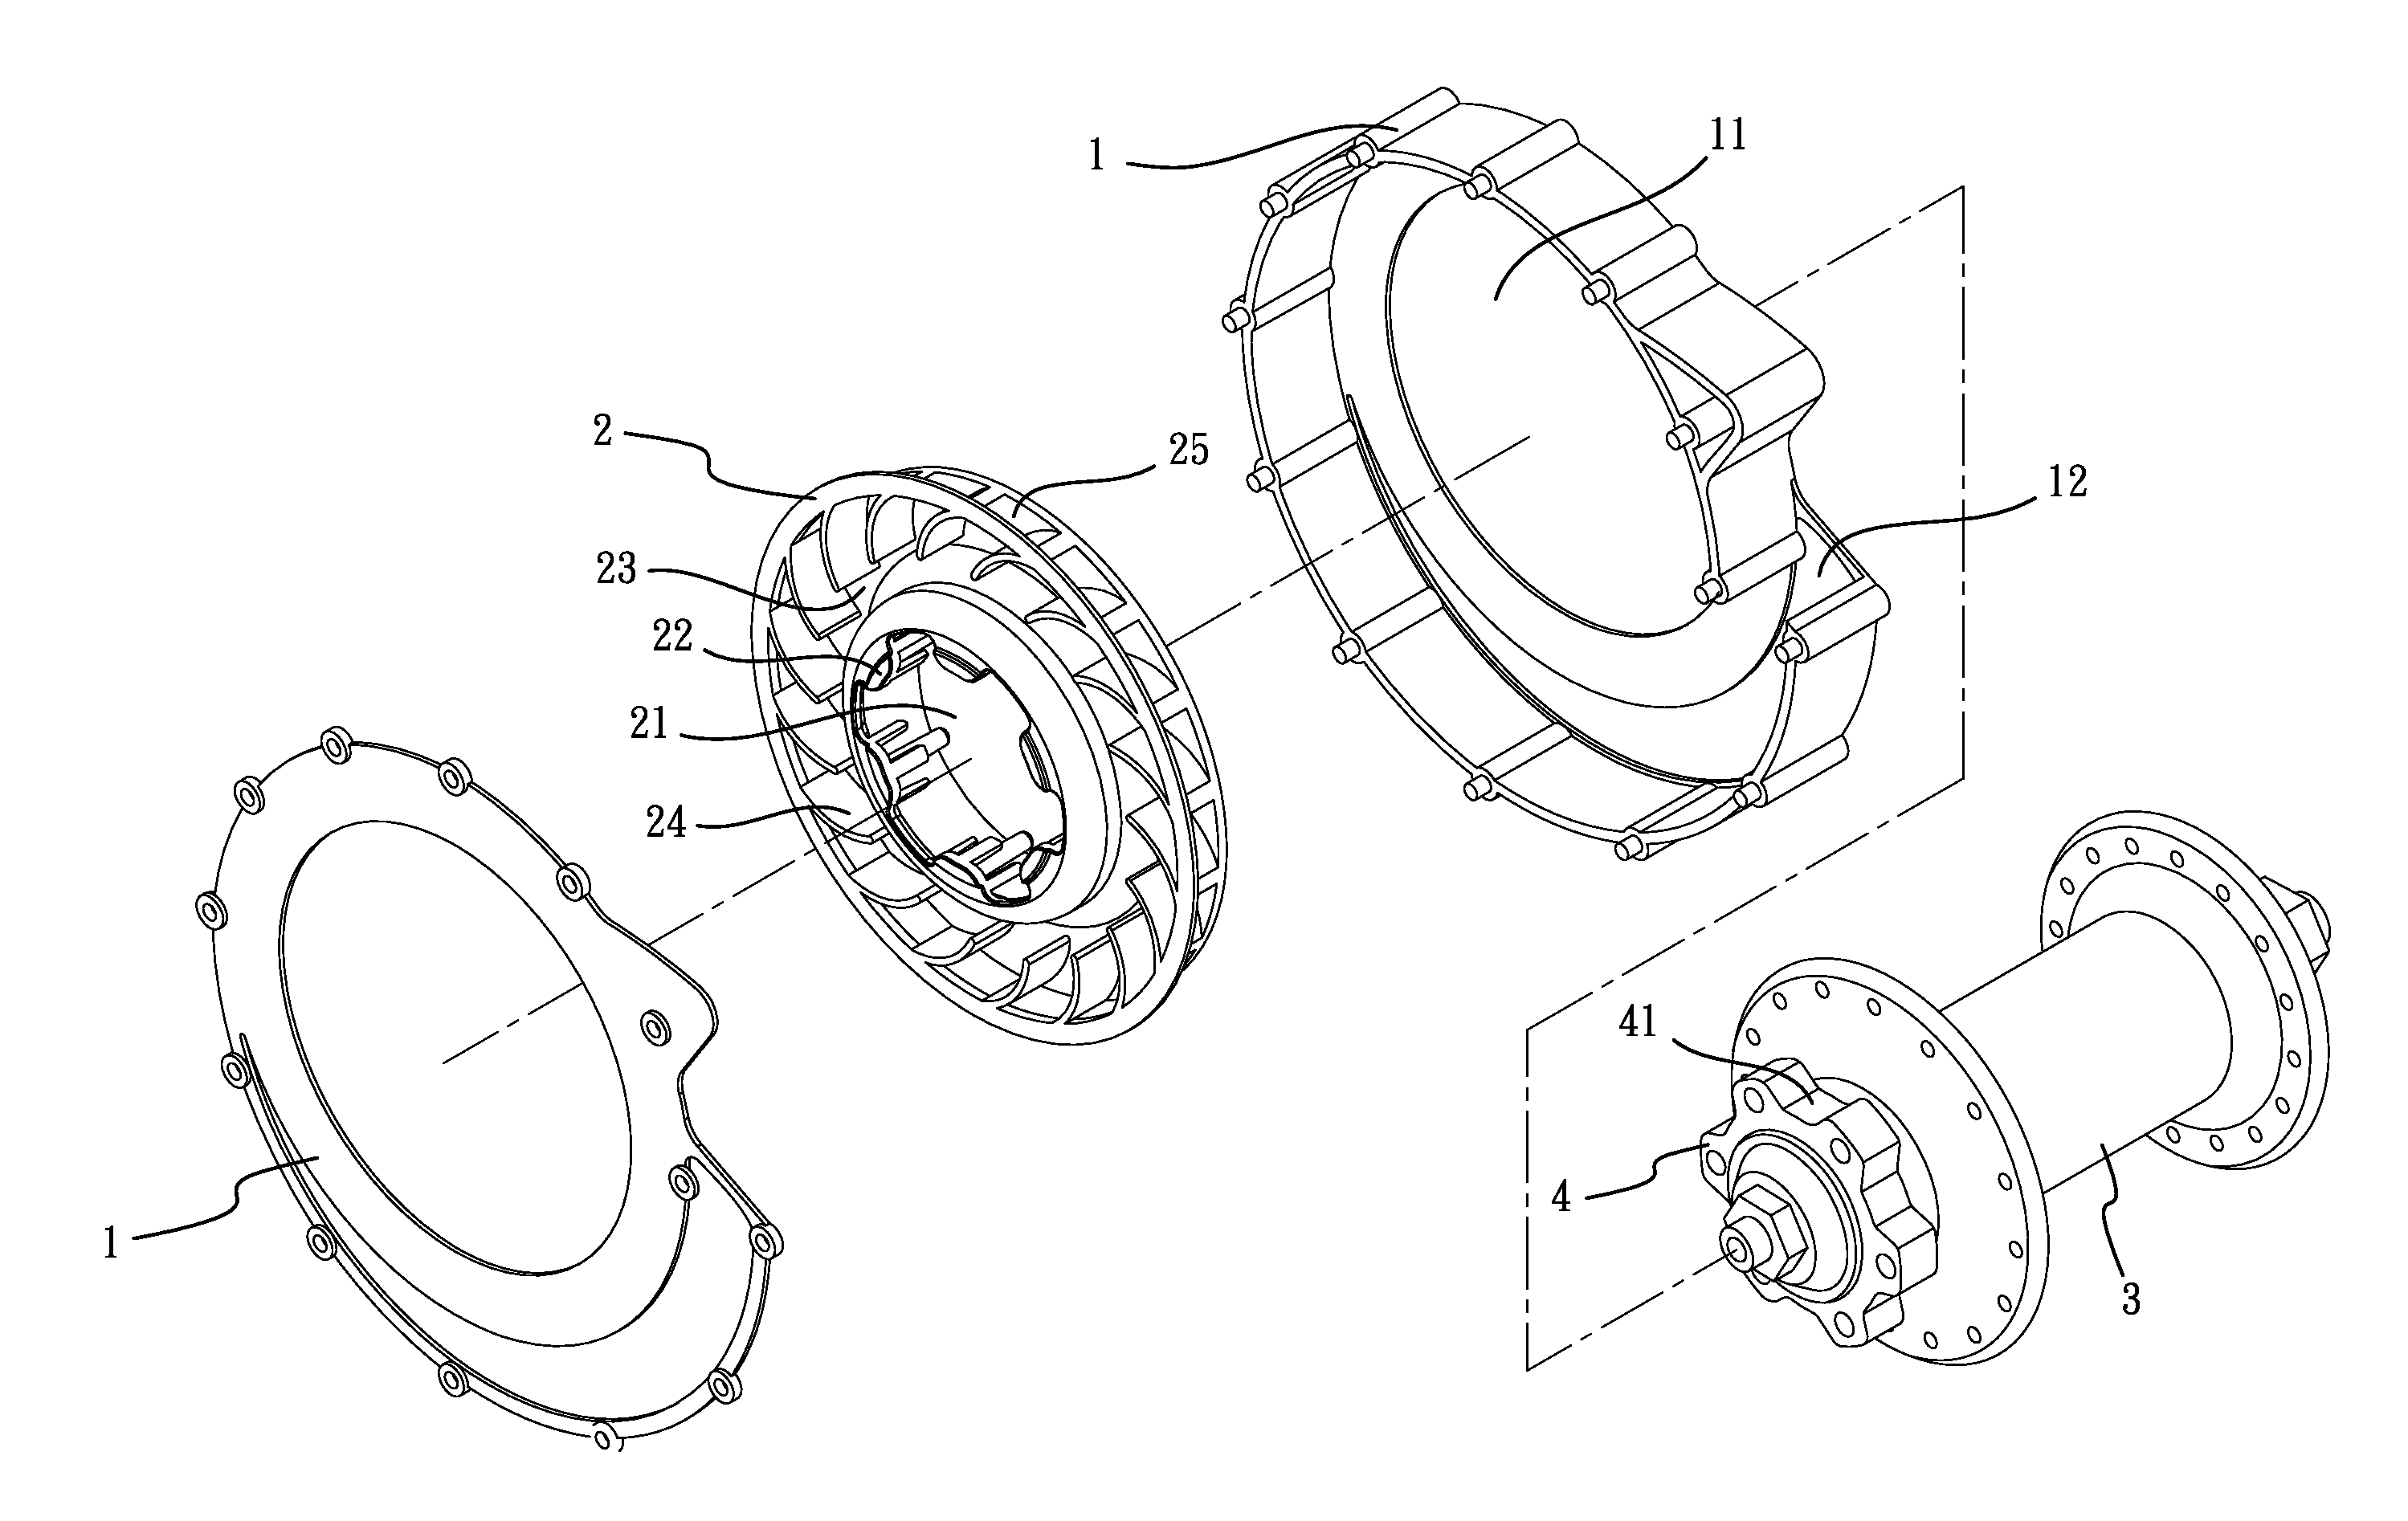 Cooling device for hydraulic braking systems